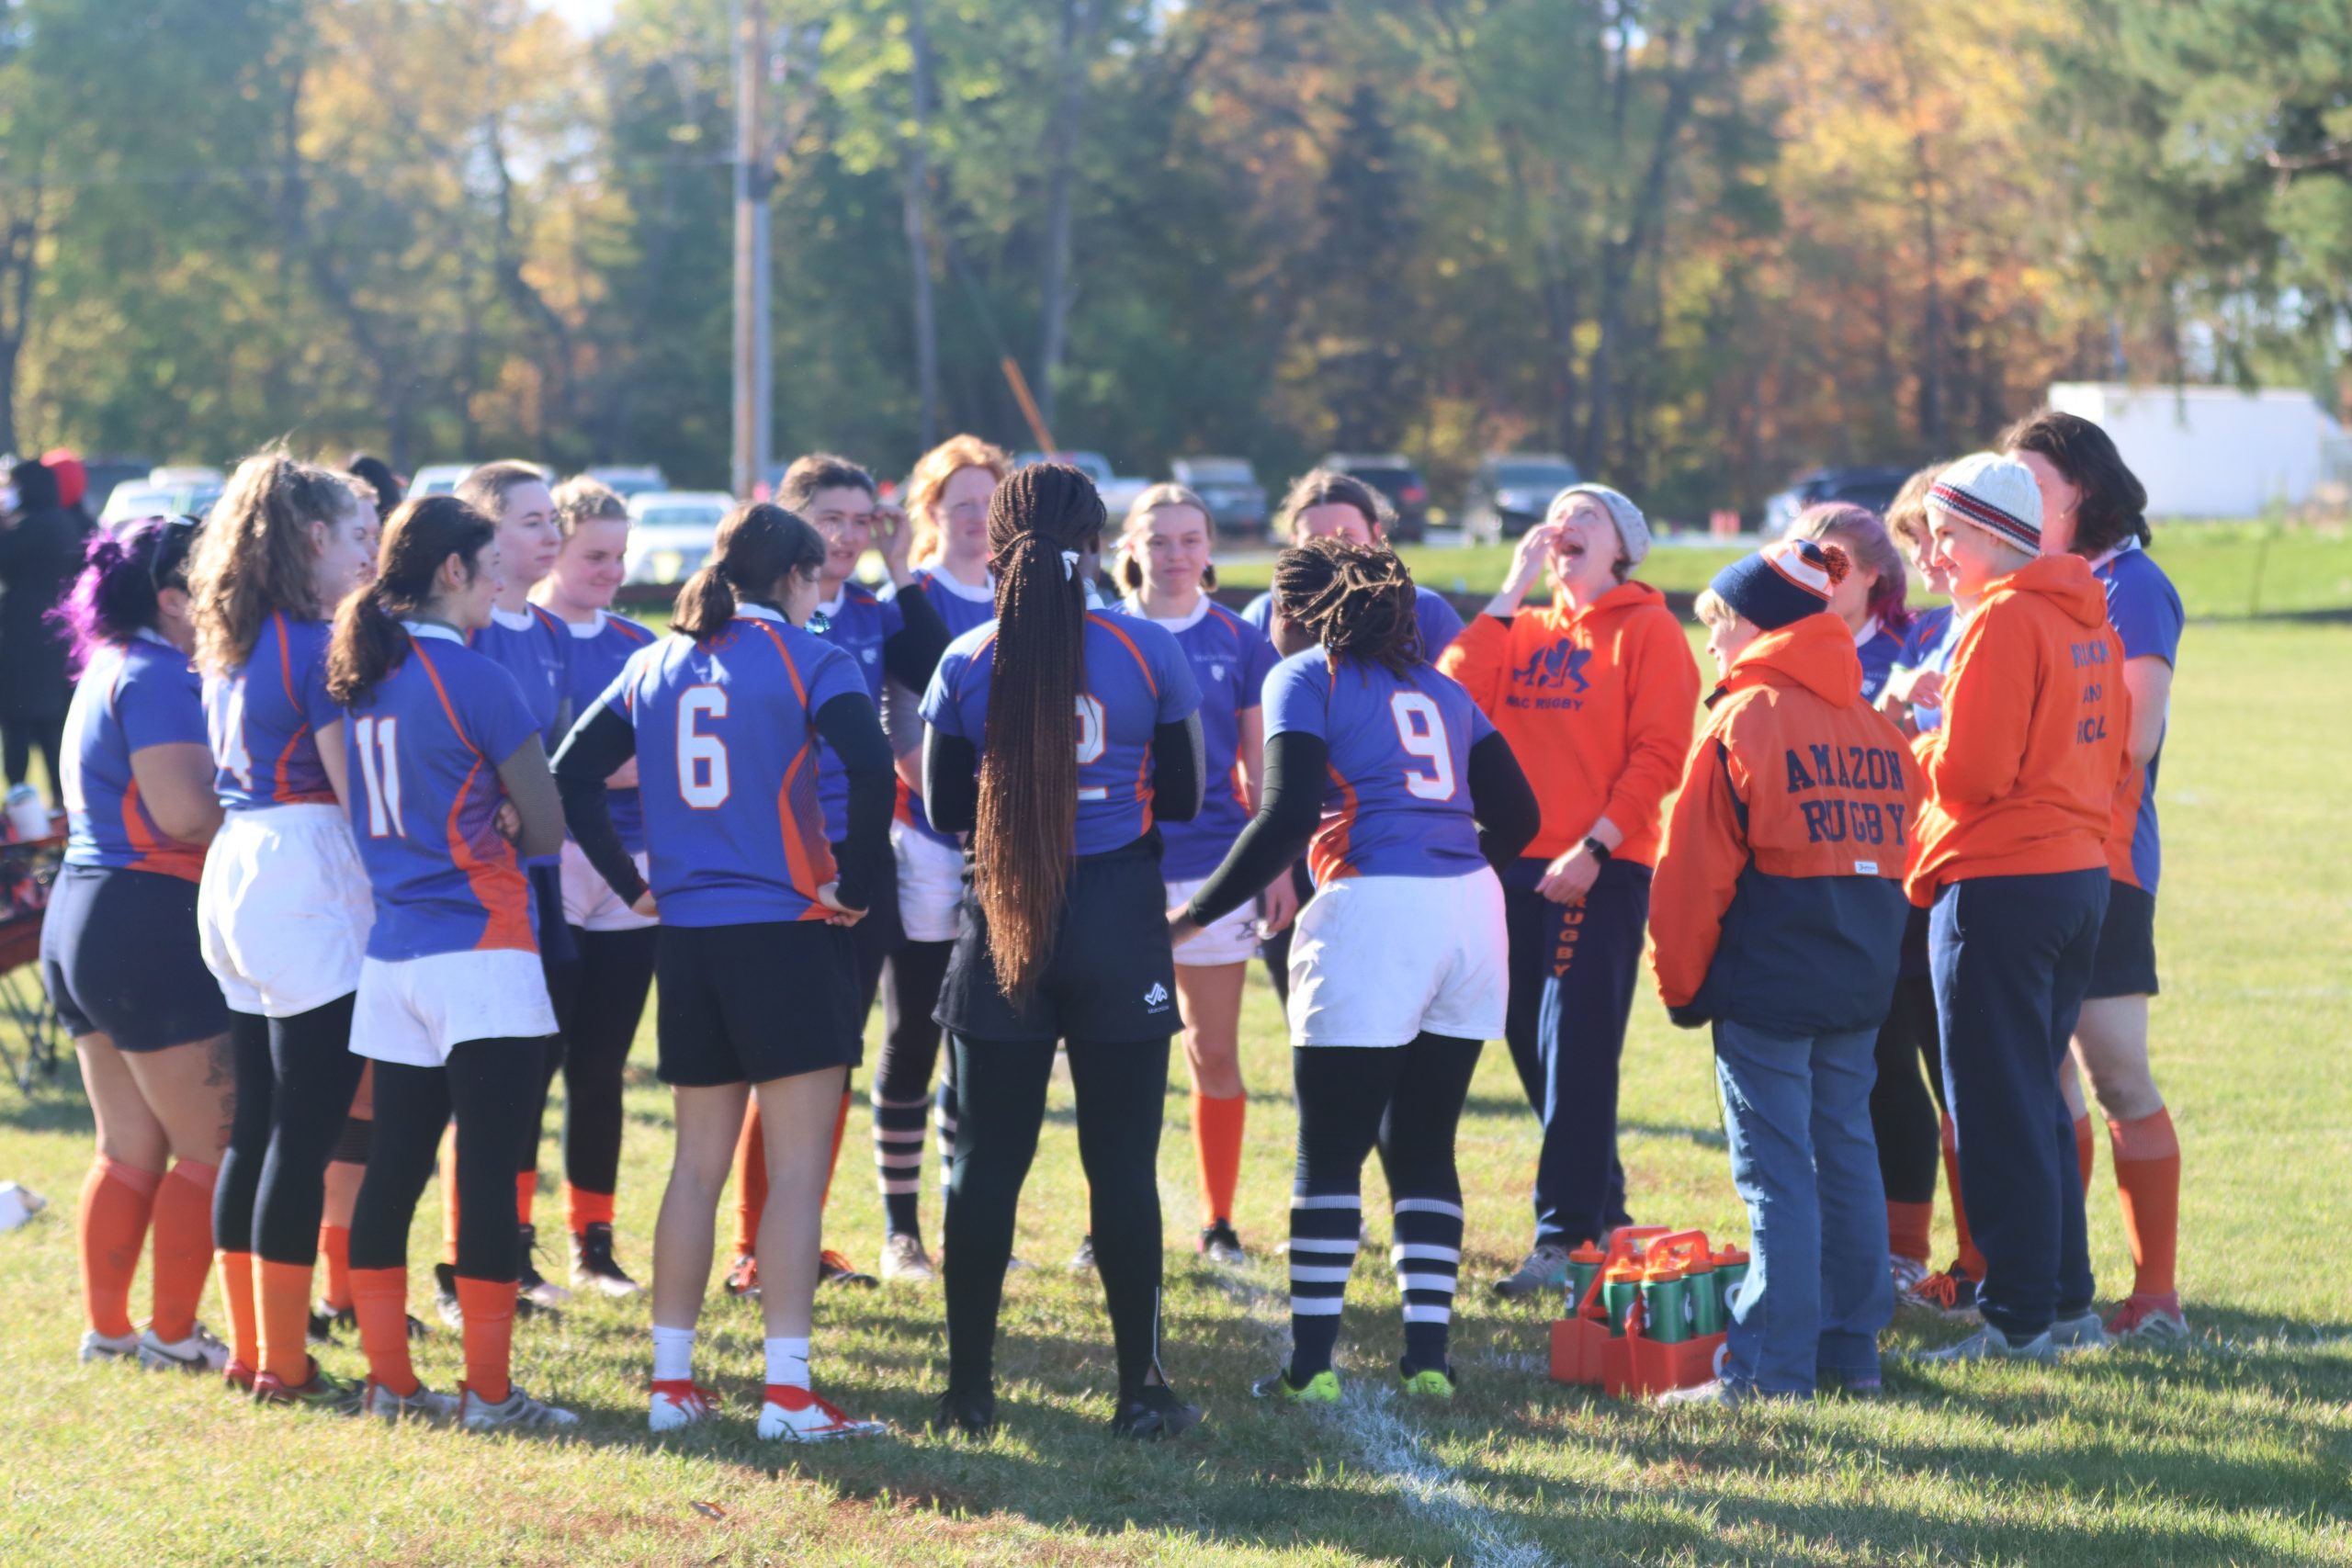 The Mac women's rugby team gathers in a circle at a game.